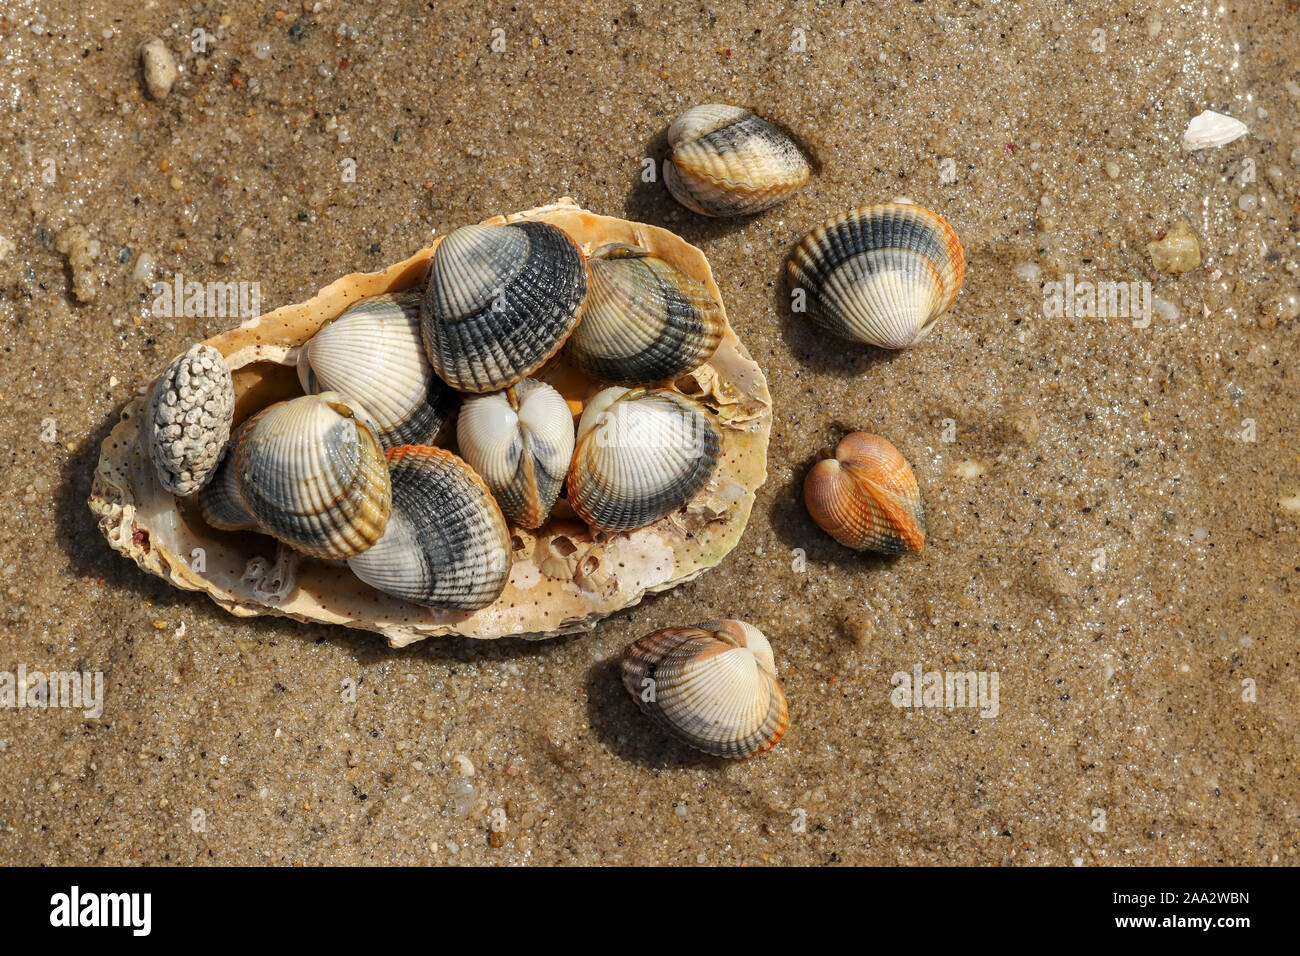 Common cockles - species of edible saltwater clams Stock Photo